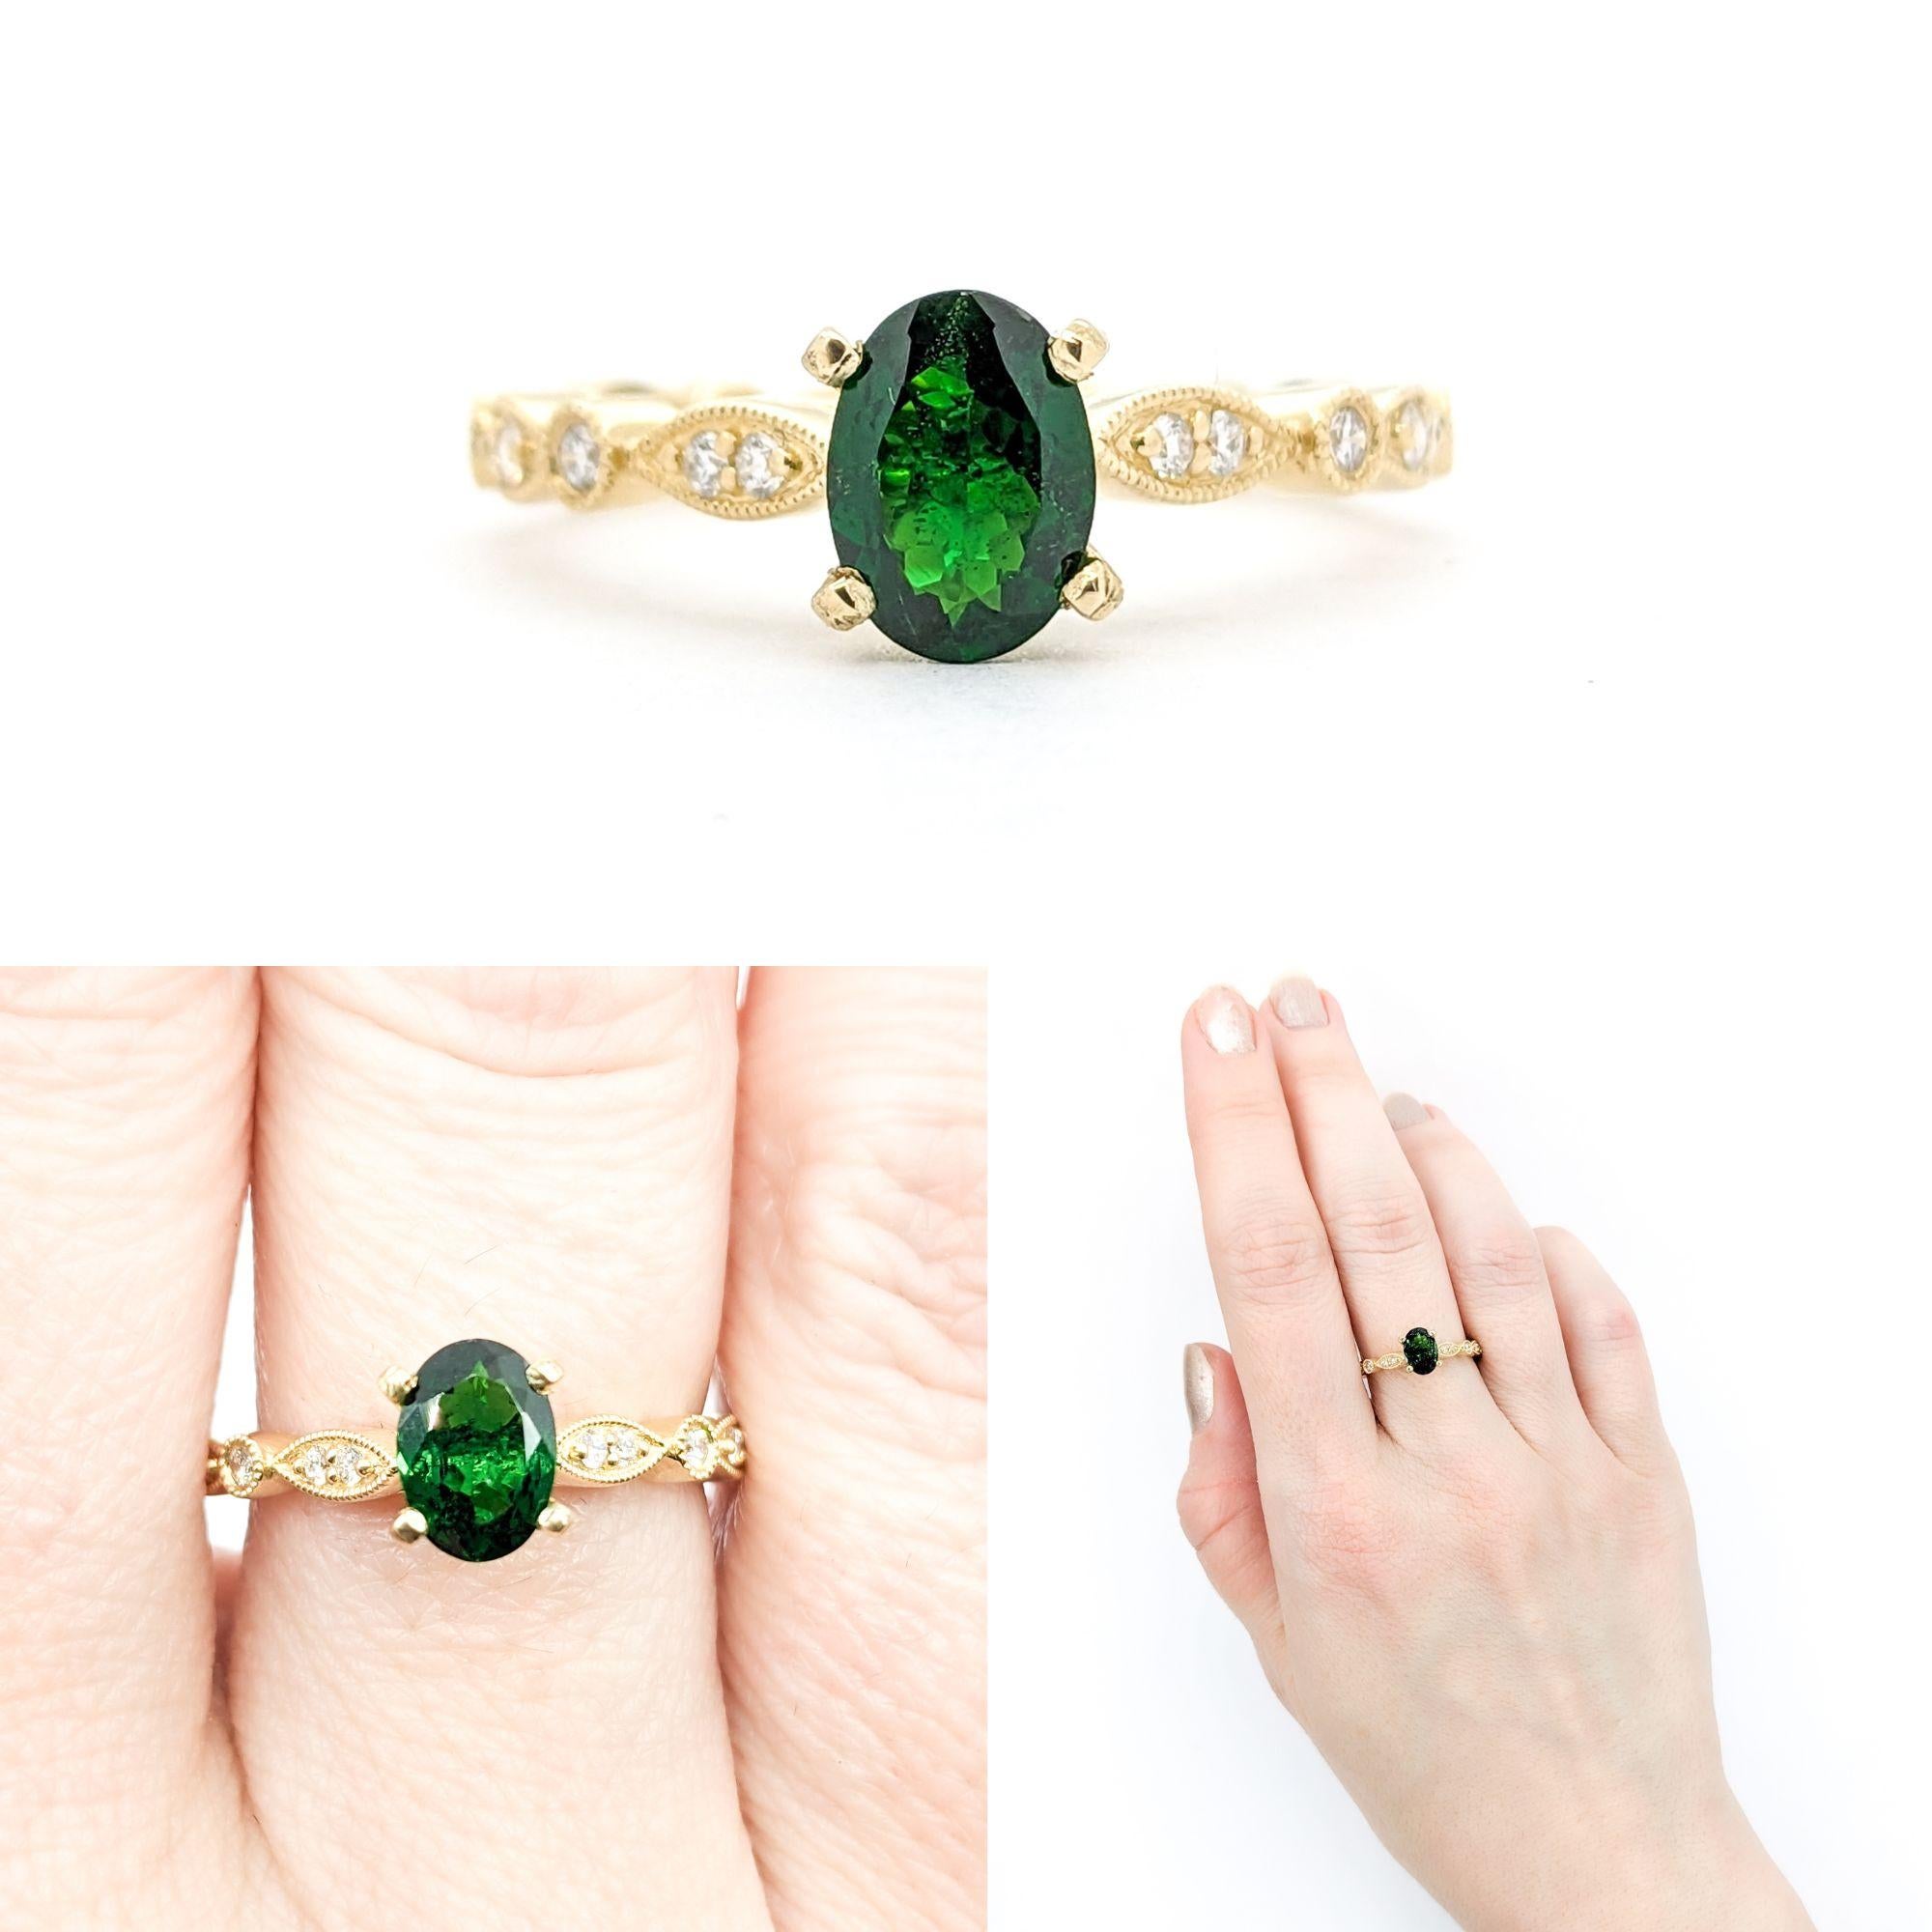 .79ct Tsavorite garnet & Diamond Ring In Yellow Gold

Introducing this elegant ring, meticulously crafted in 14kt yellow gold. It features a striking .79 carat green Tsavorite garnet centerpiece, beautifully accented by .18 carats of sparkling round